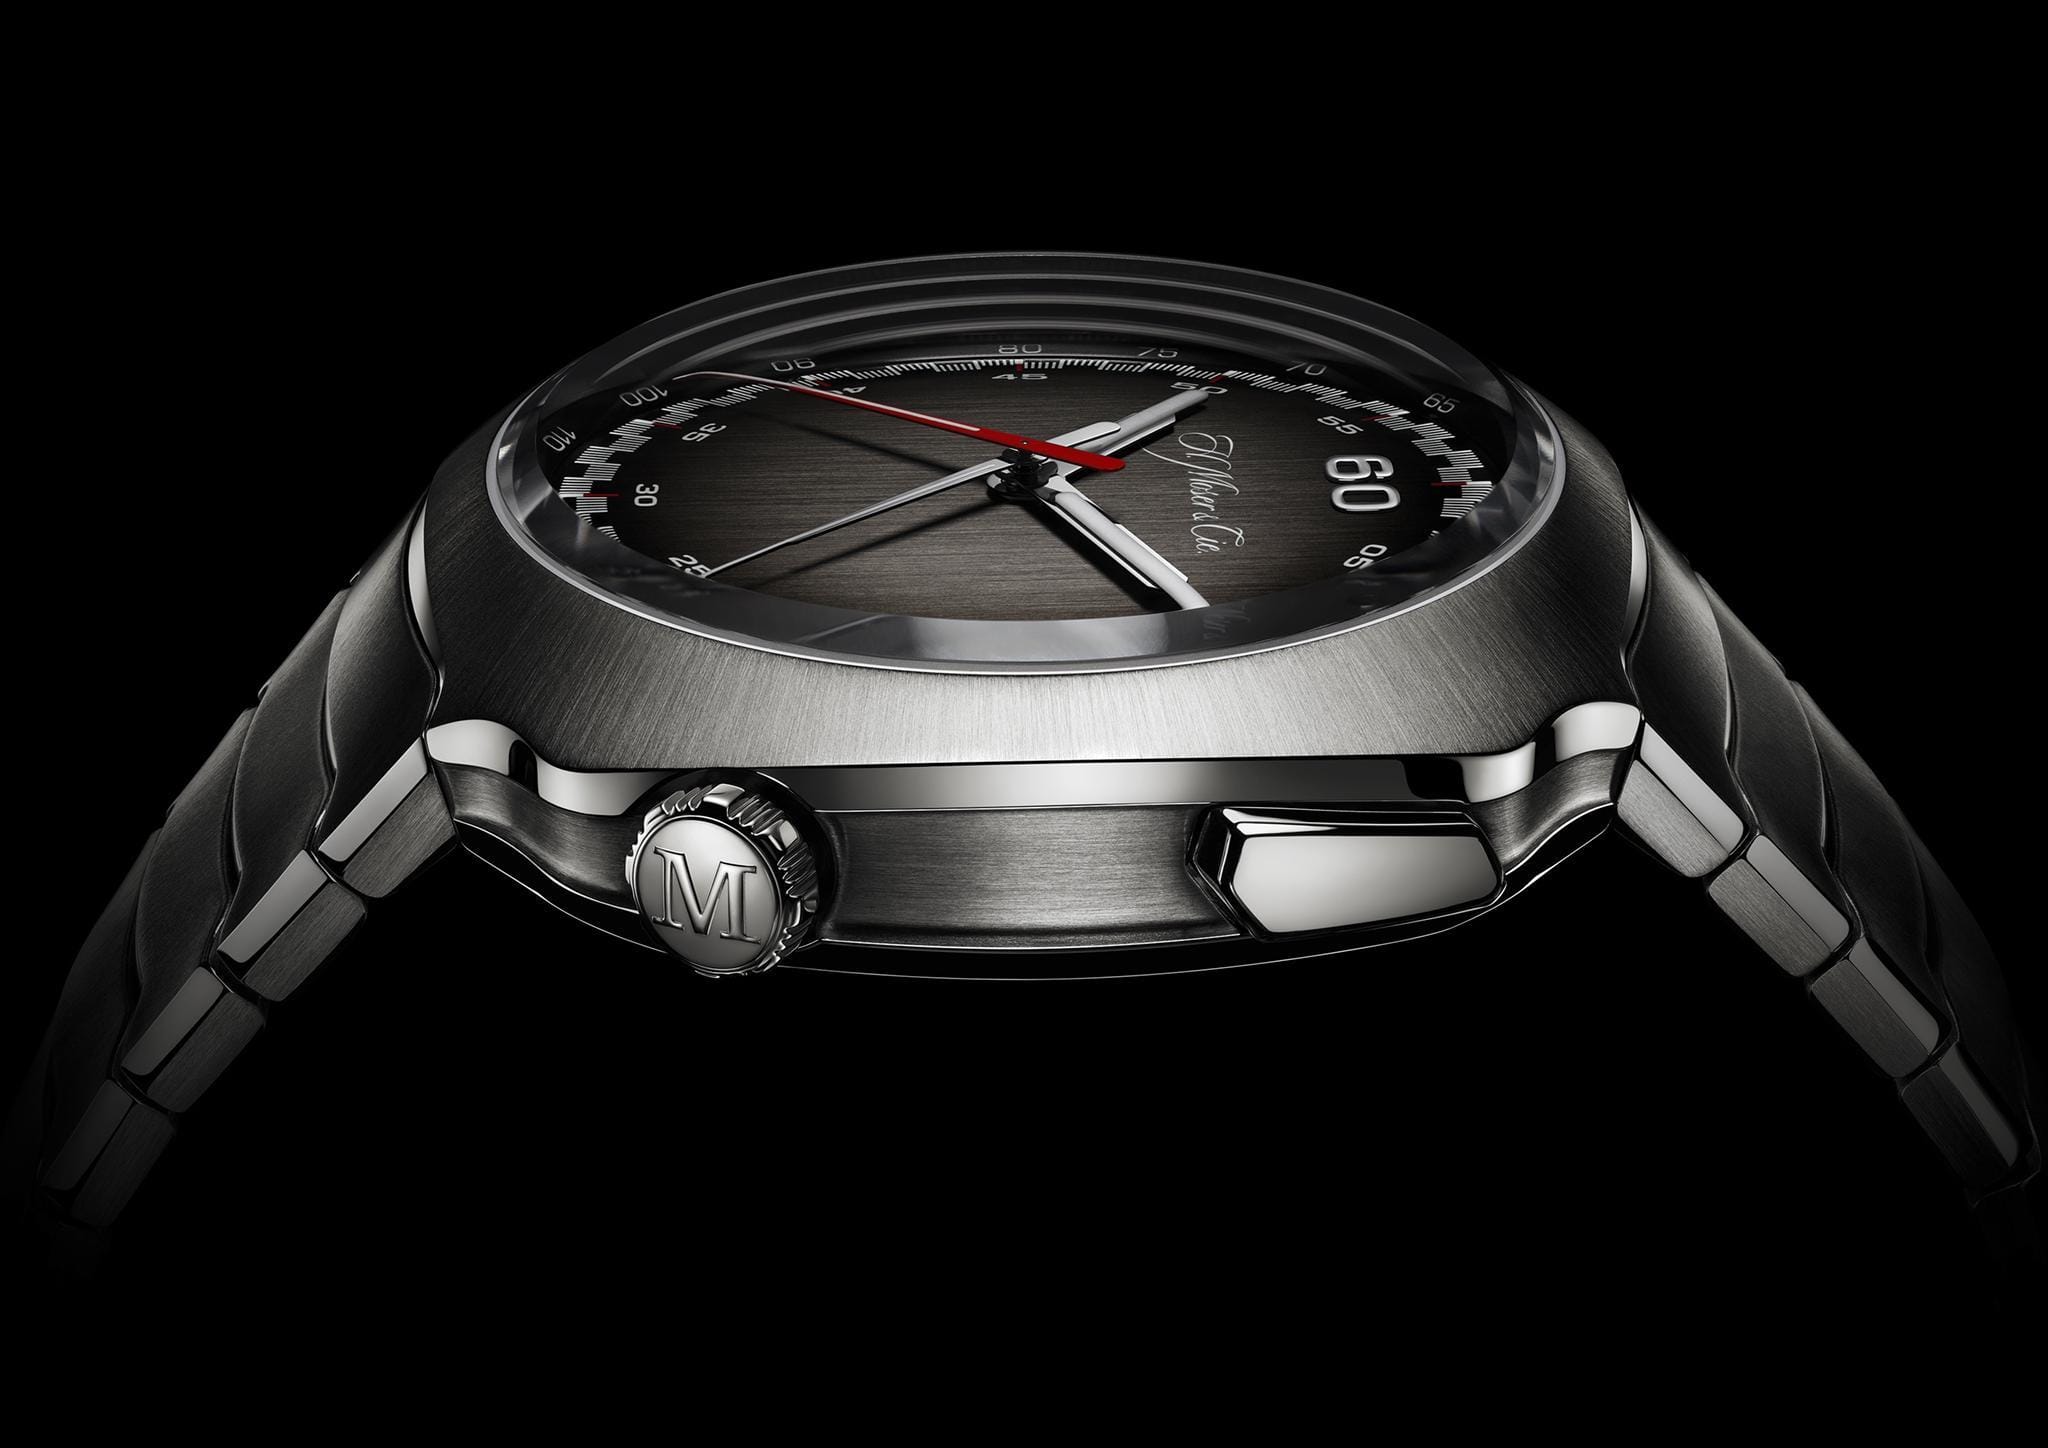 H. MOSER & CIE. PRESENTS THE STREAMLINER FLYBACK CHRONOGRAPH AUTOMATIC, A NEW COLLECTION WITH STEEL INTEGRATED BRACELET